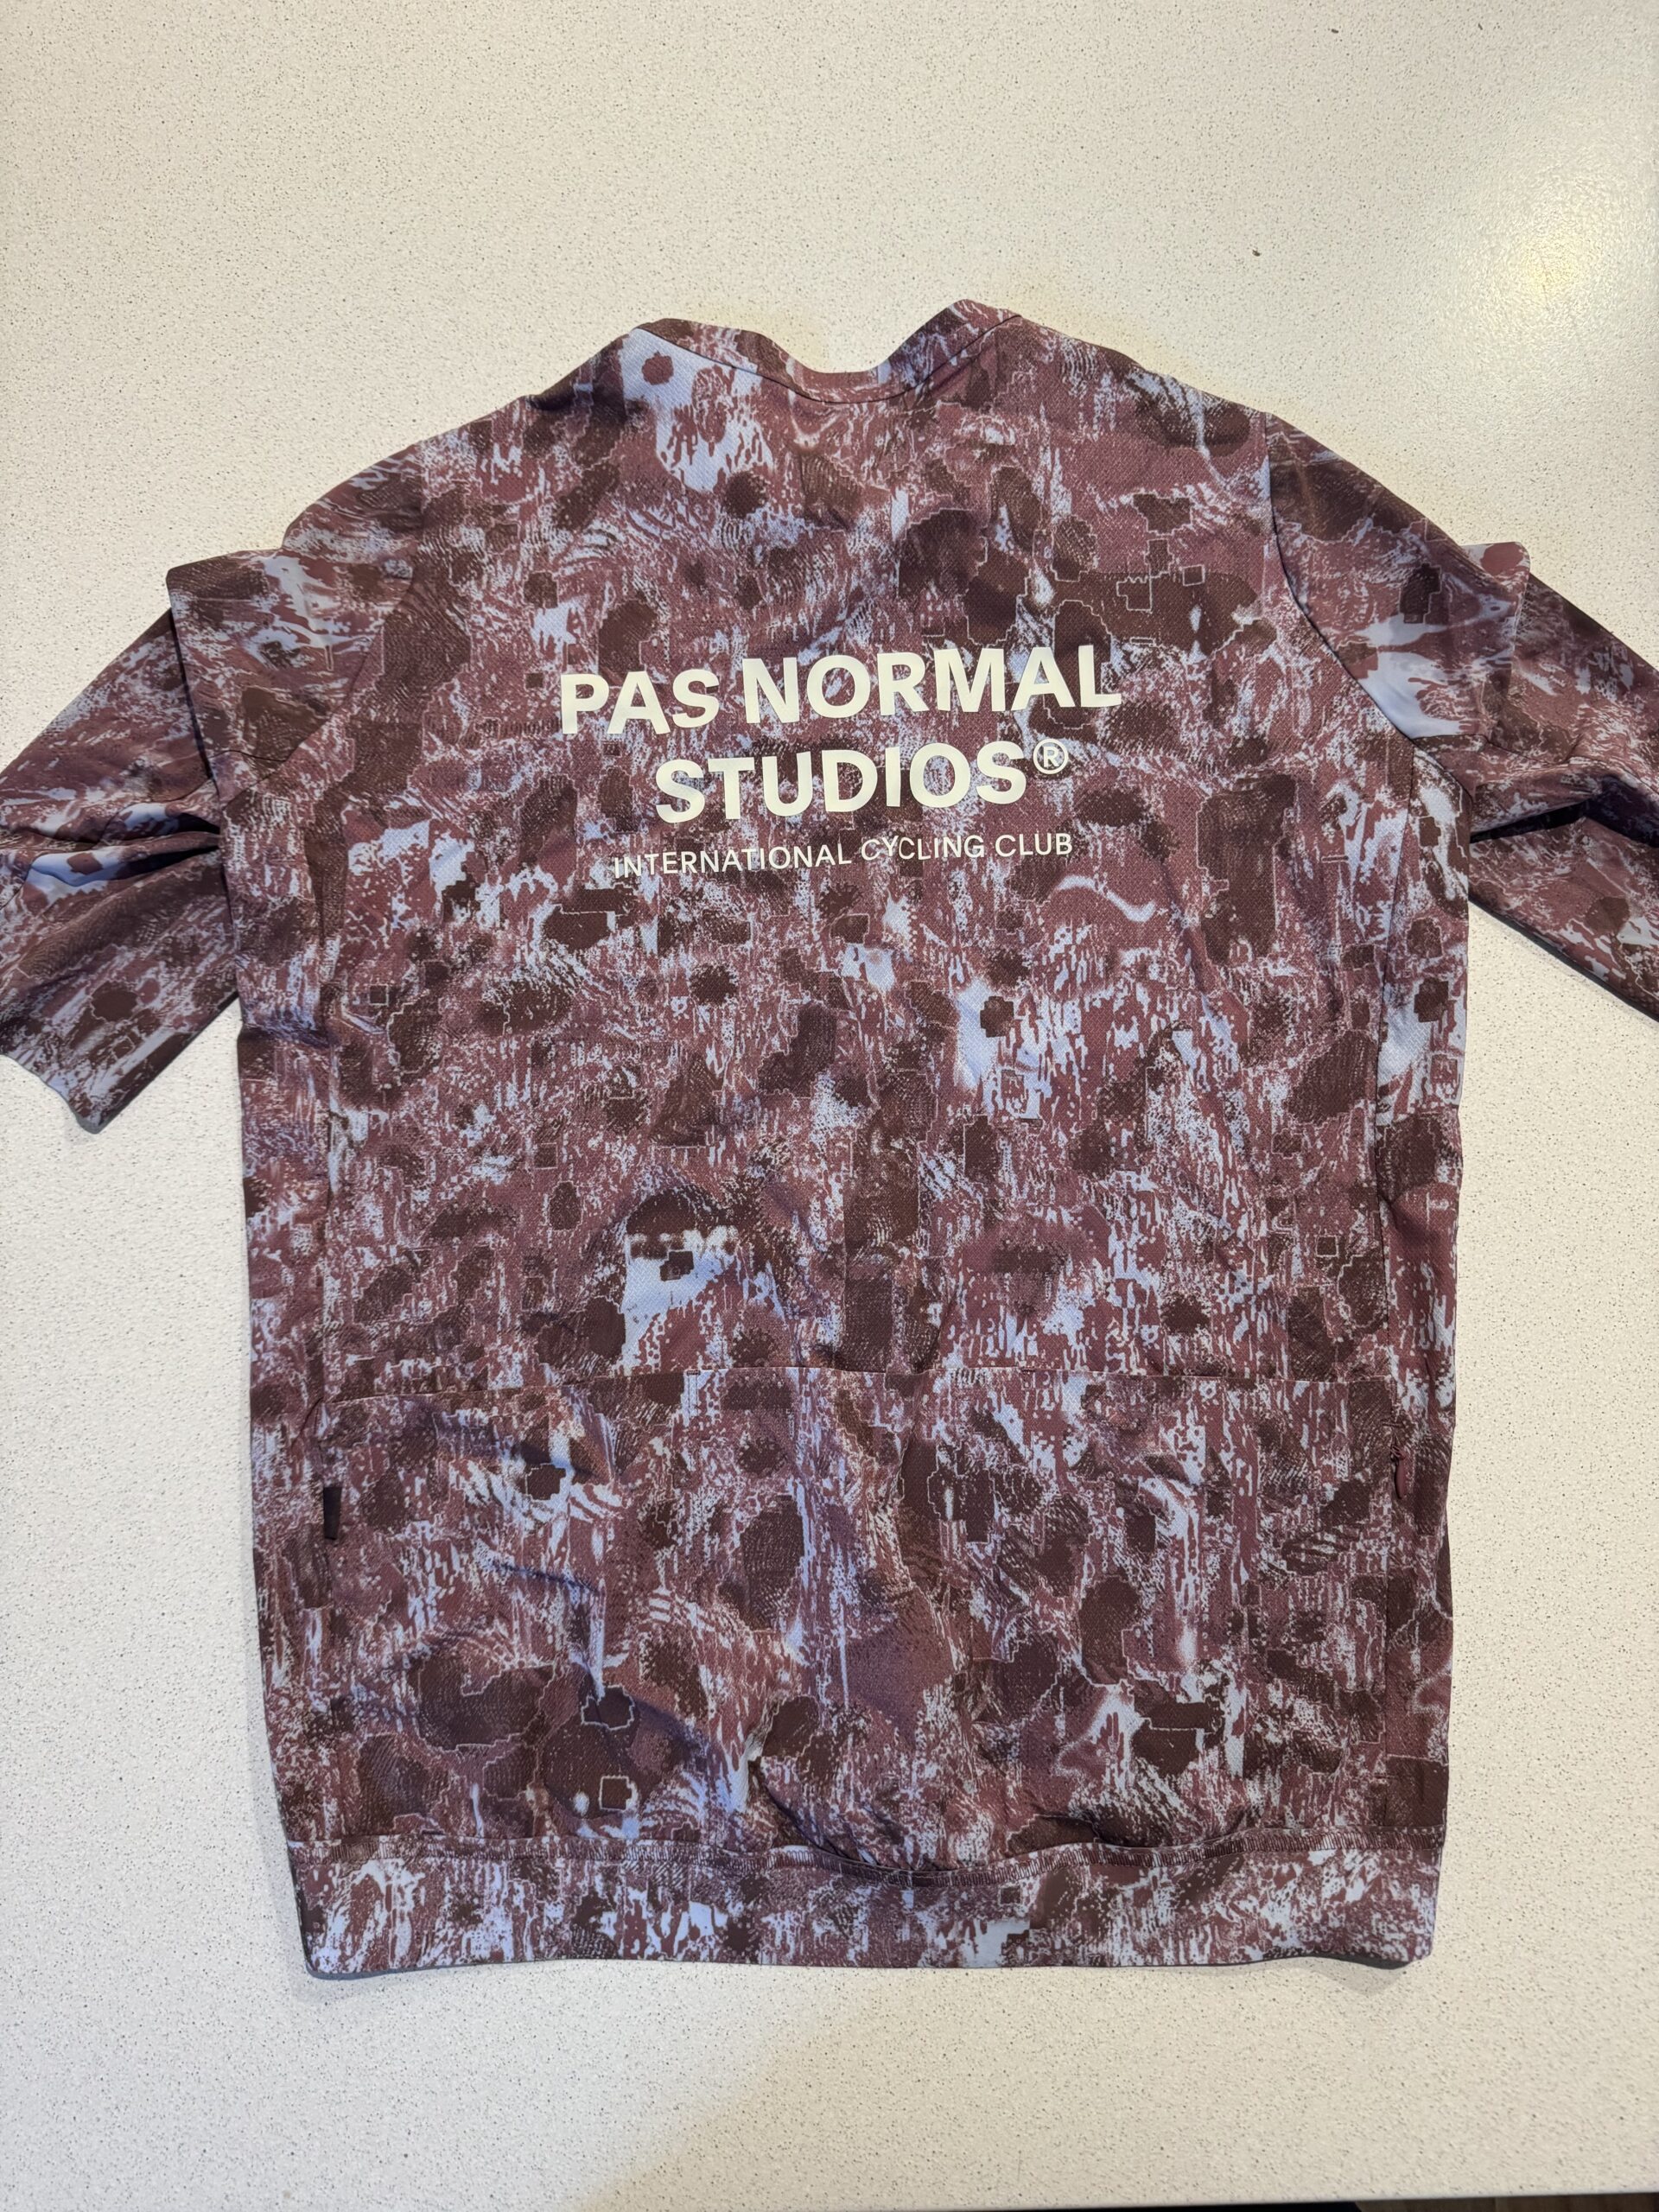 Pas Normal Solitude jersey and shorts (men’s) - NEW